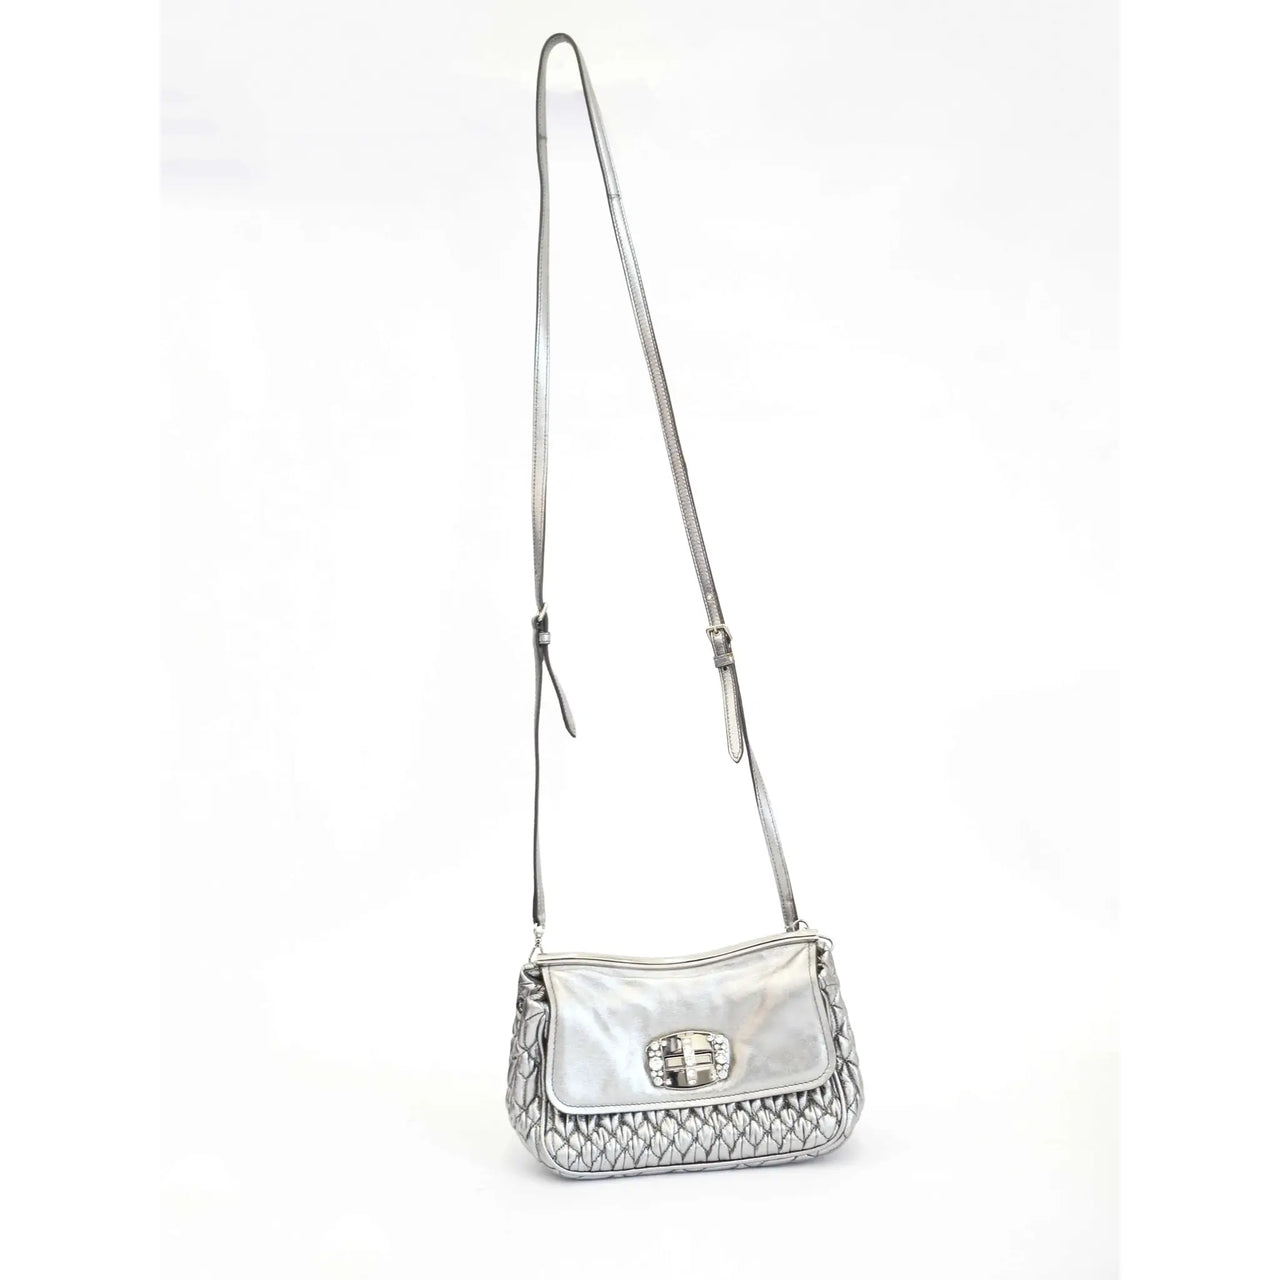 Miu Miu Iconic Crystal shoulder bag in blue quilted leather